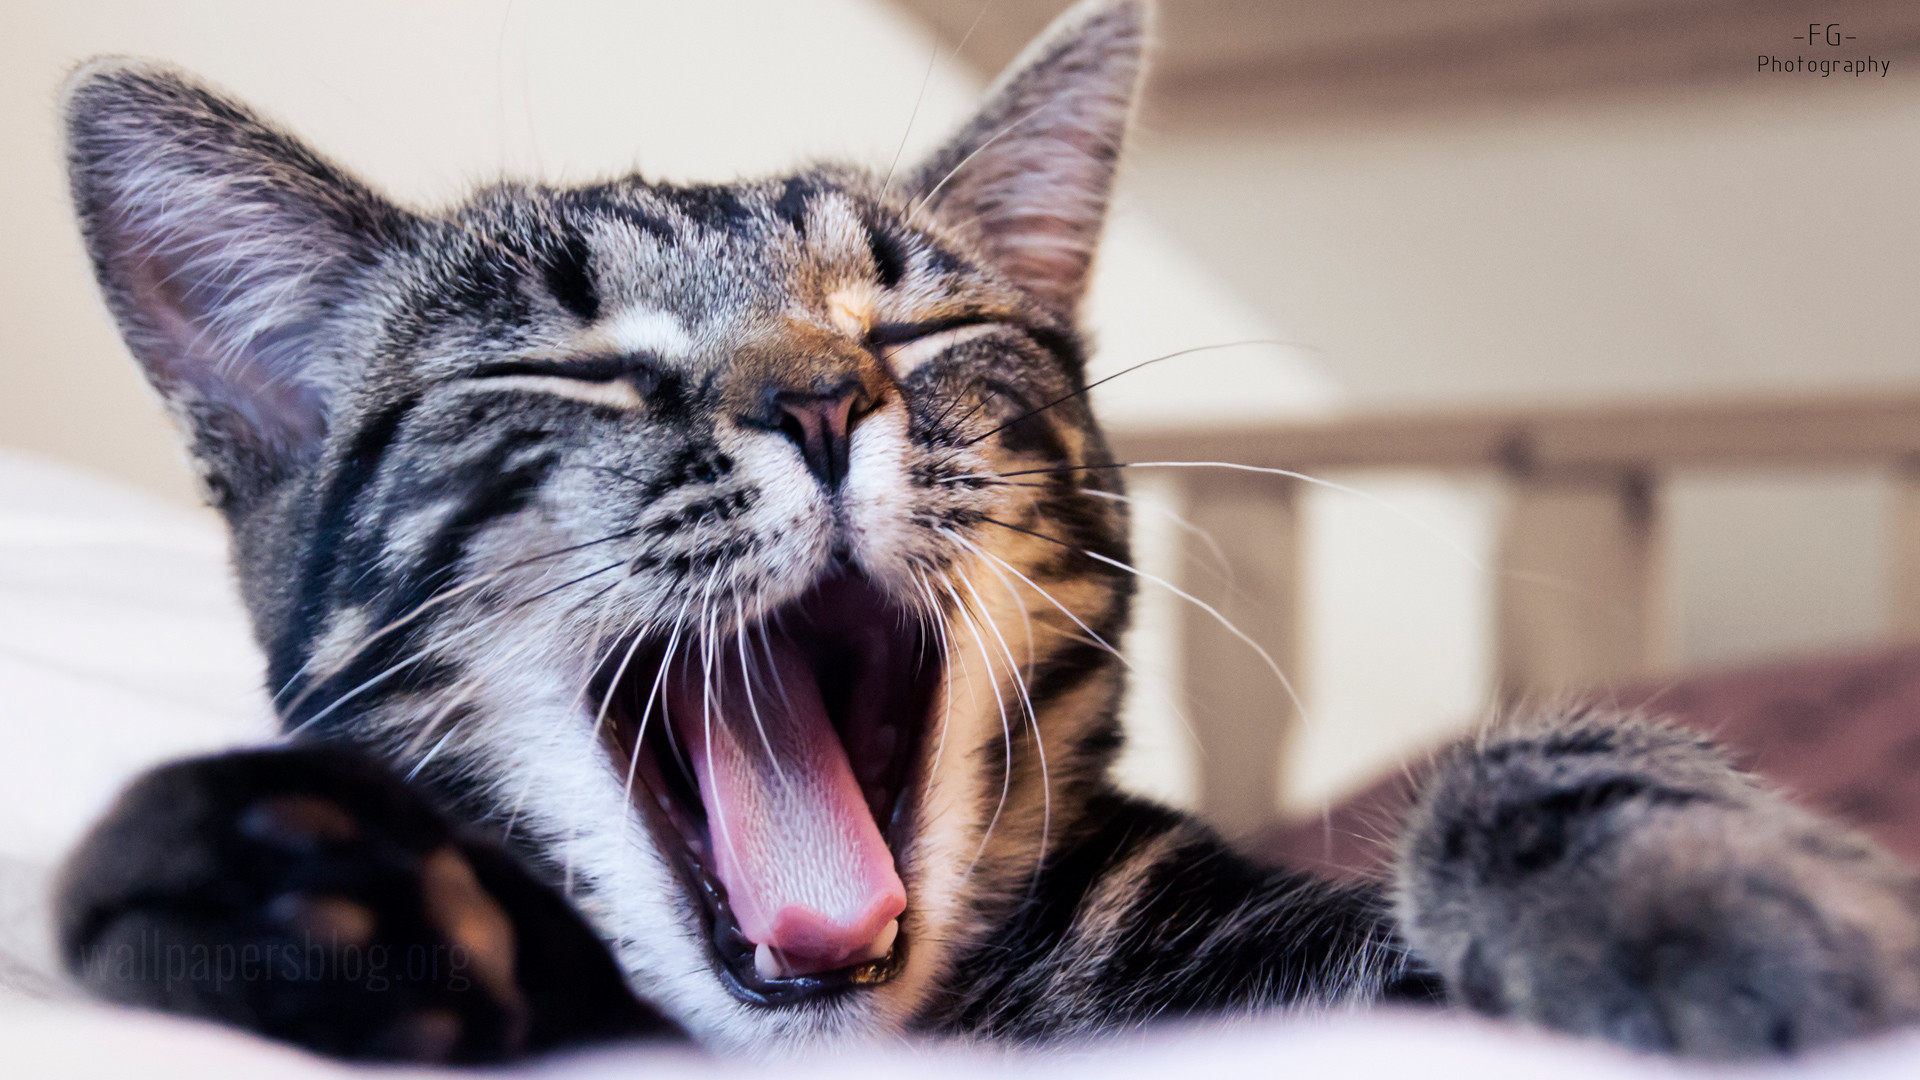 cat hd wallpaper 1920x1080,cat,whiskers,felidae,small to medium sized cats,yawn